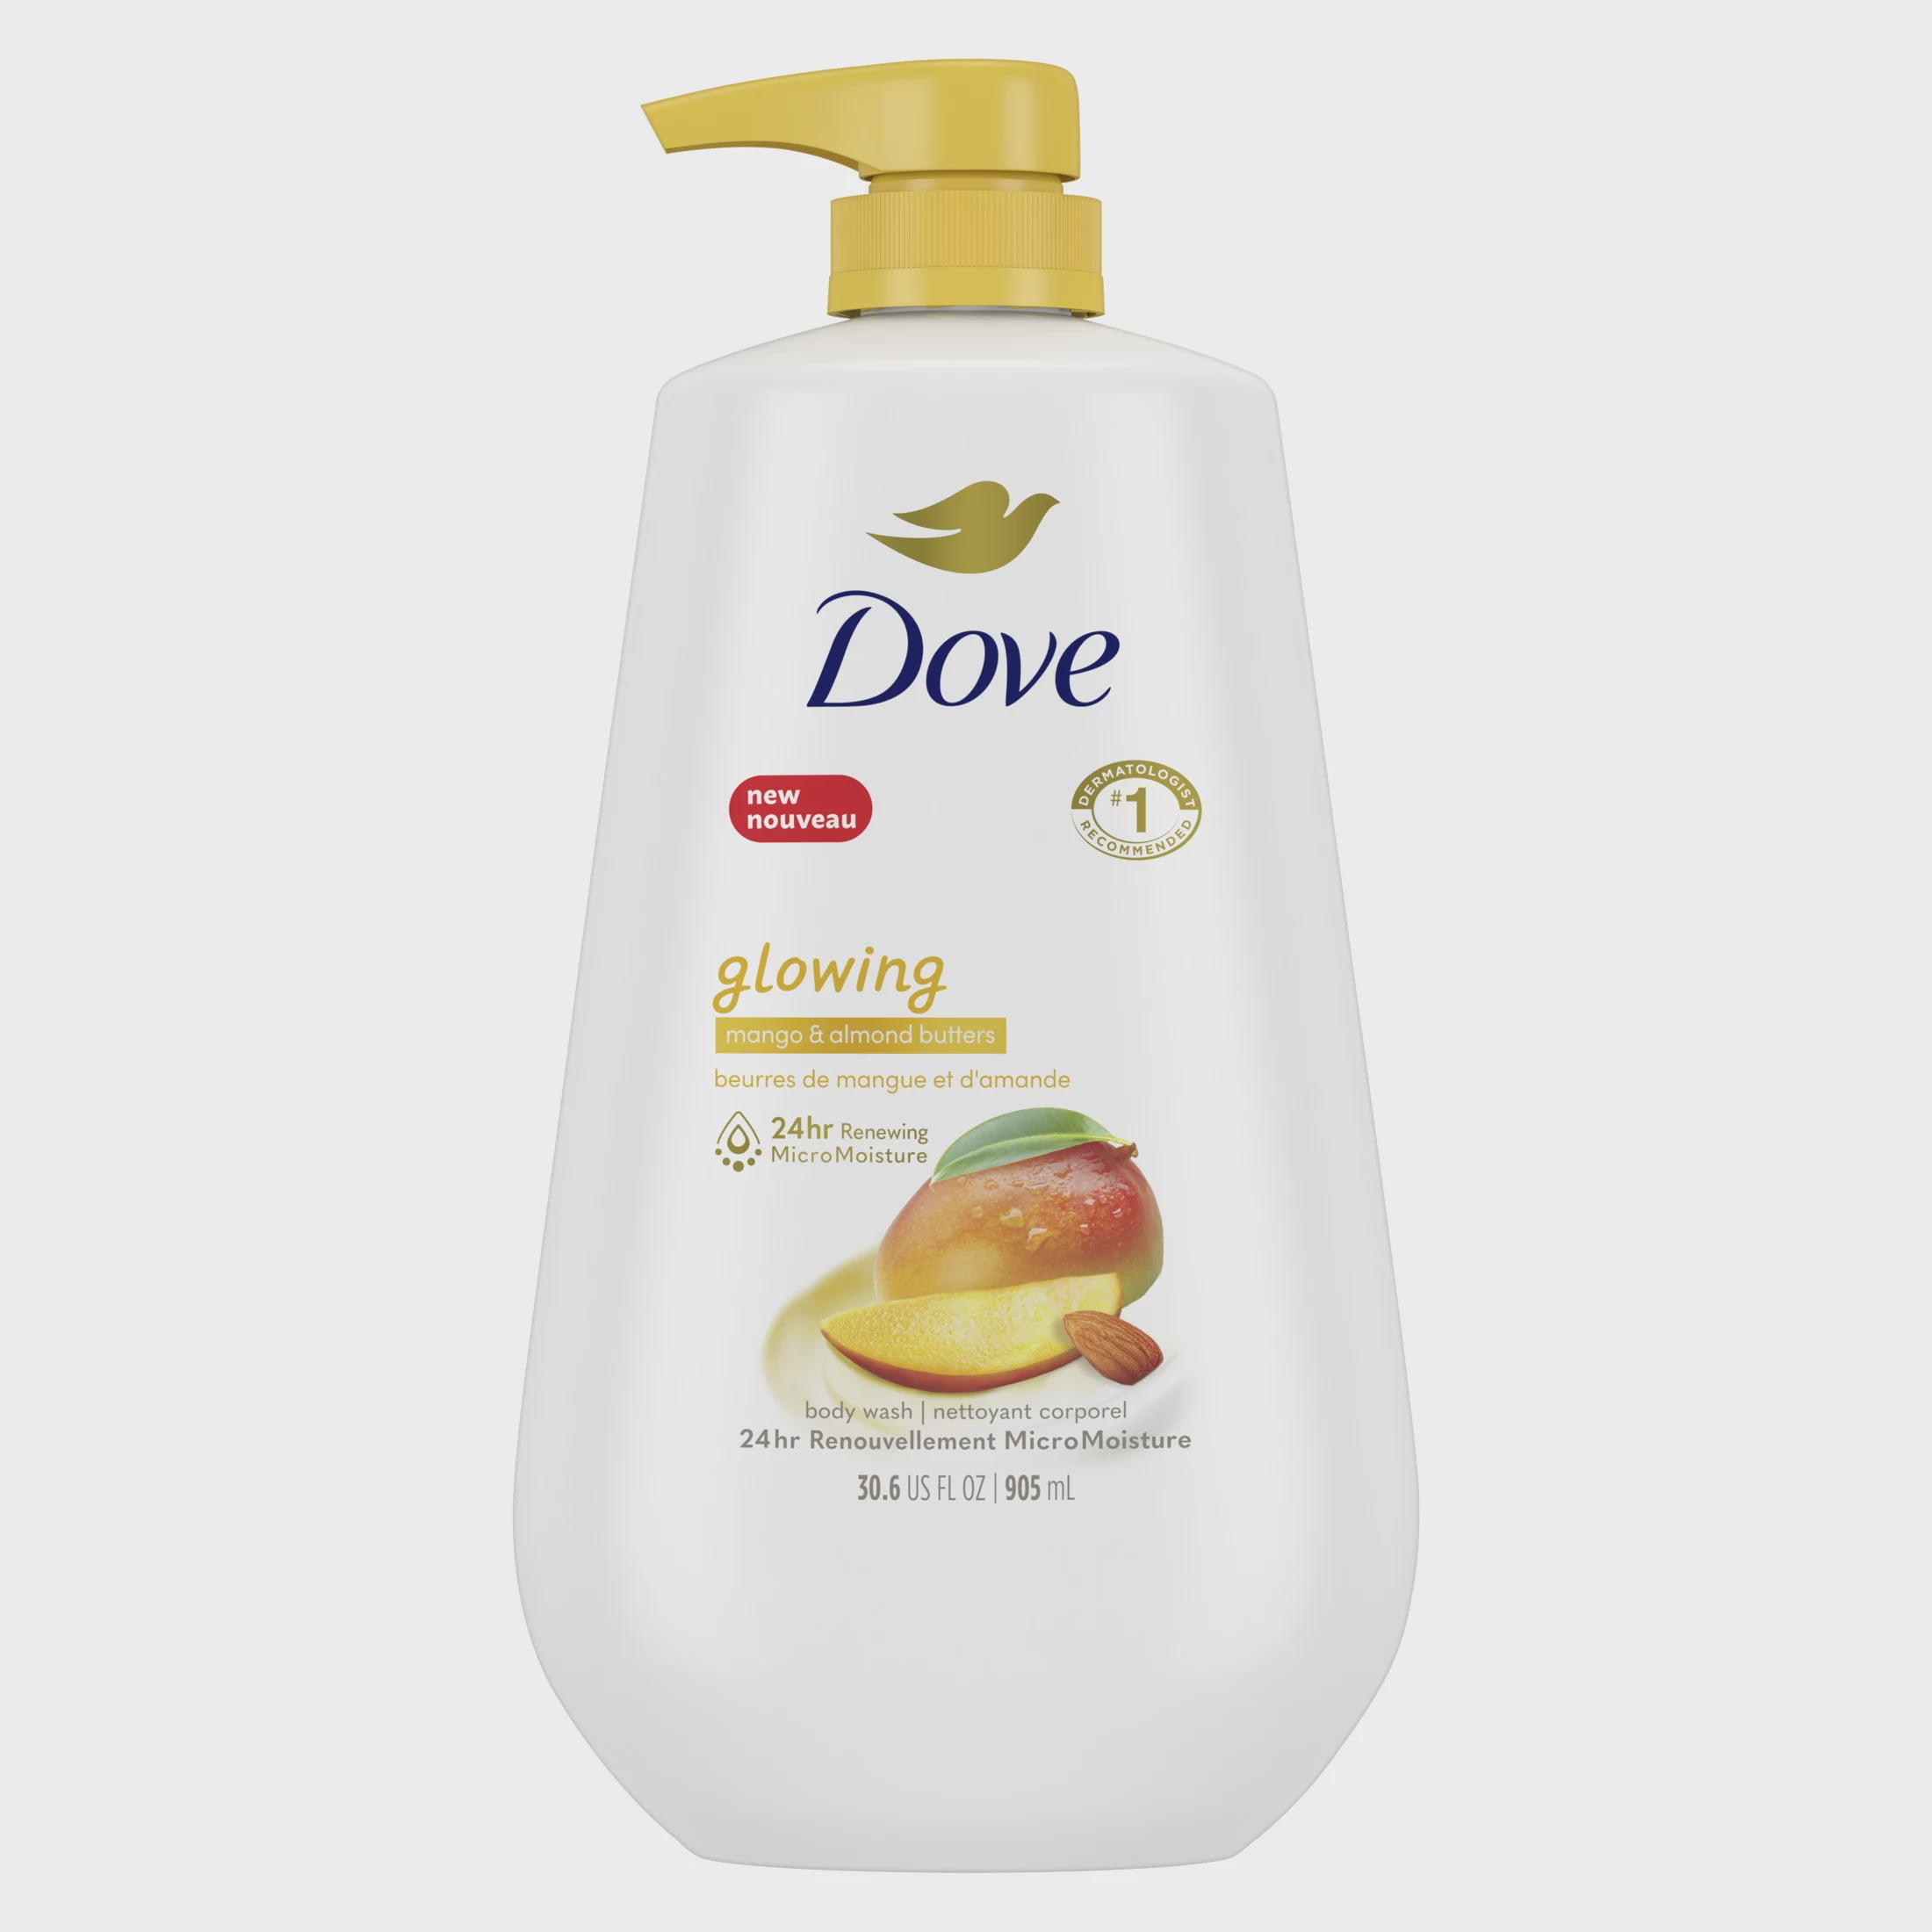 Top Rated Body Wash